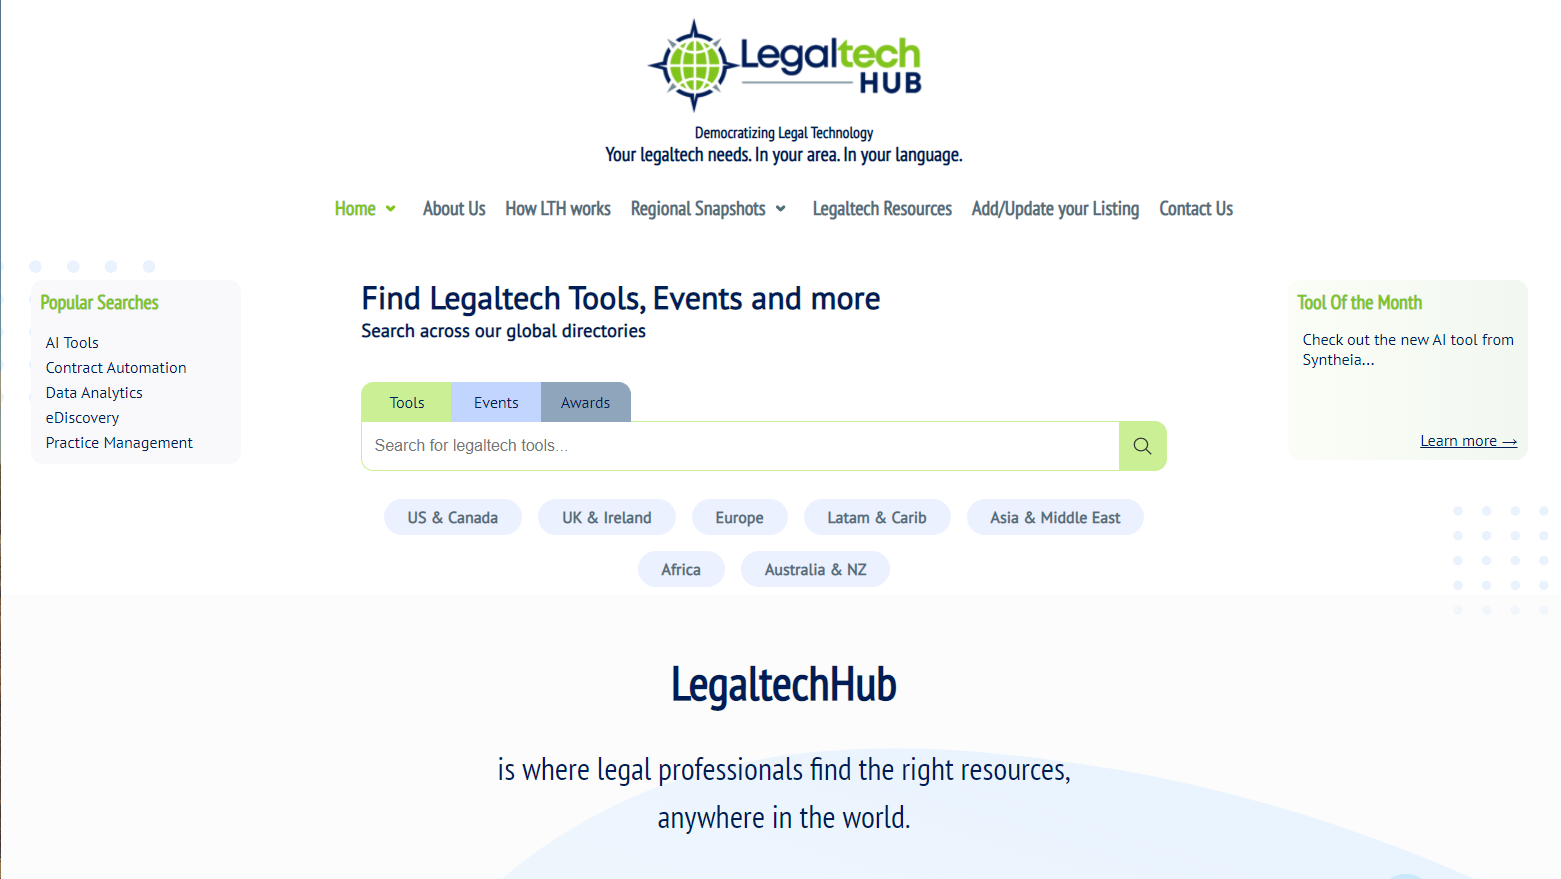 Launching Today: A Global Directory of Legaltech Products and Resources